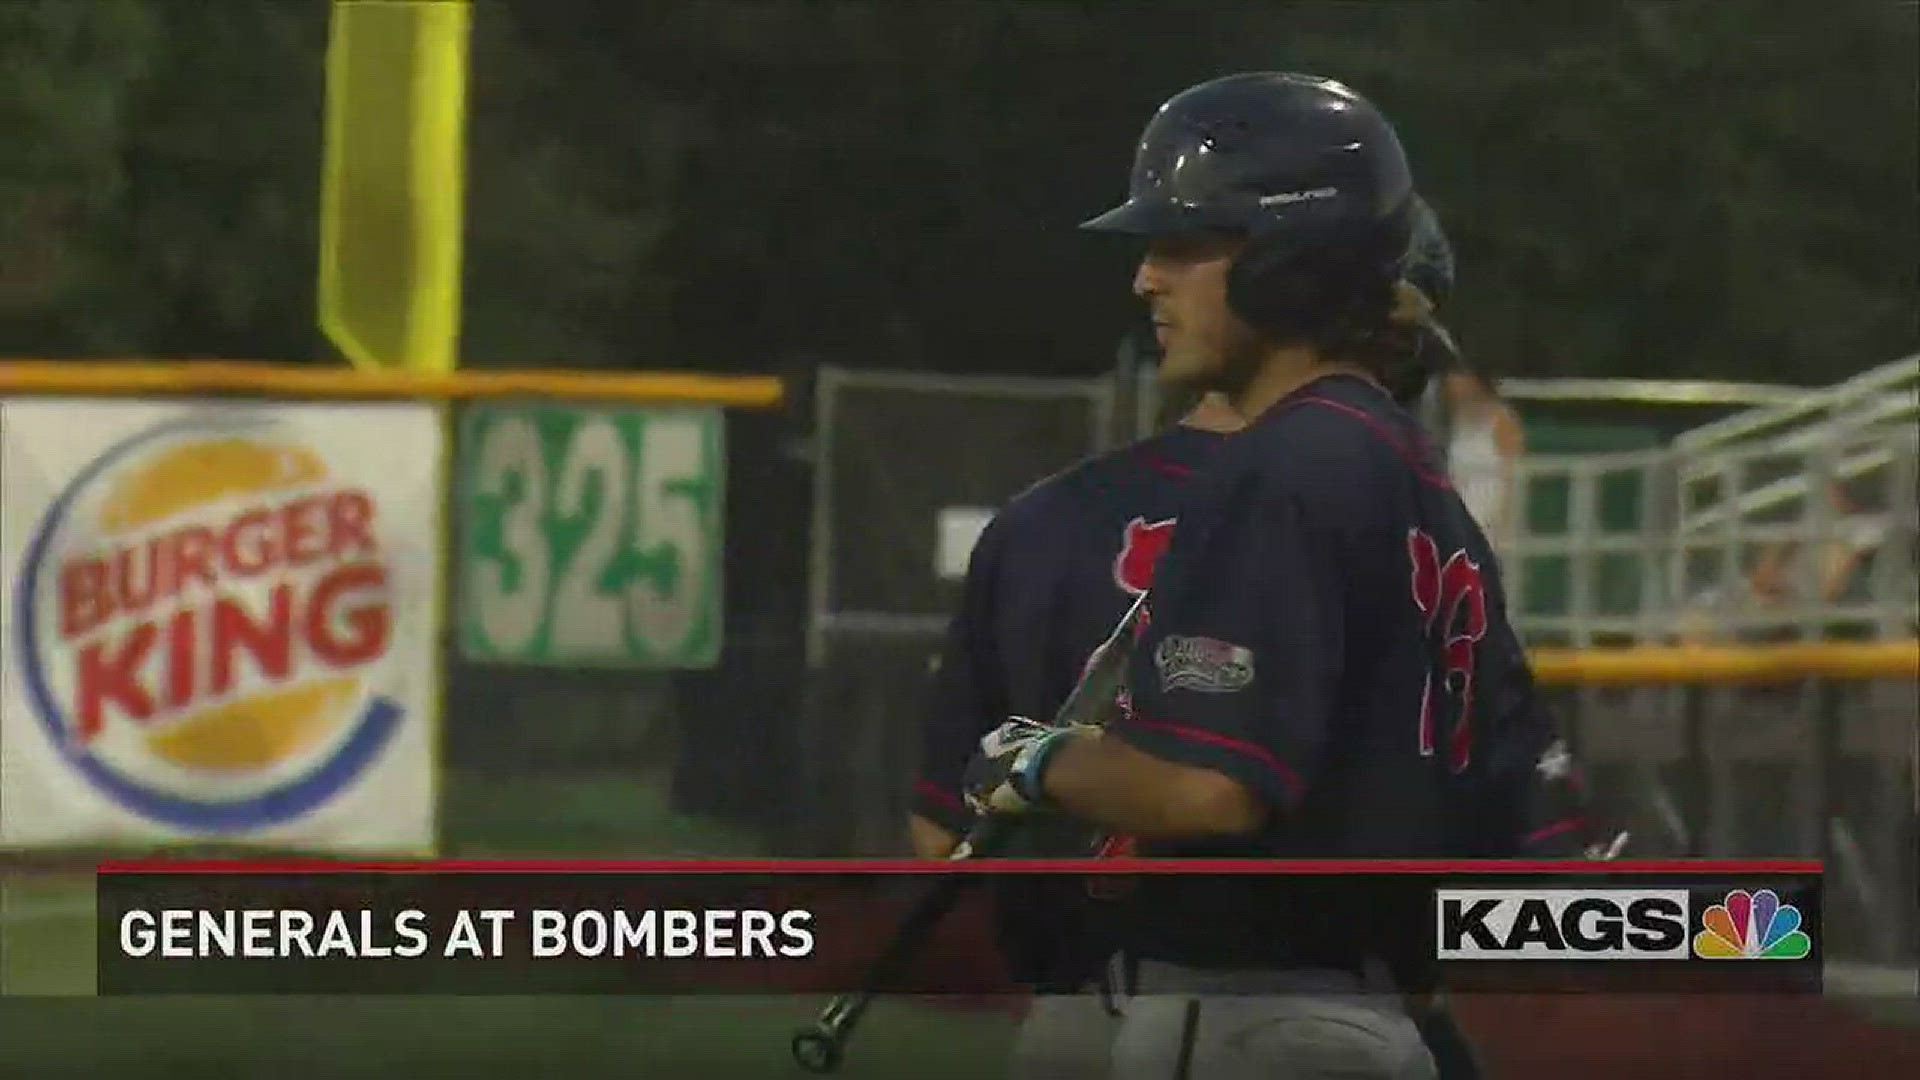 The Victoria Generals defeated the Brazos Valley Bombers 5-0 on Monday night.